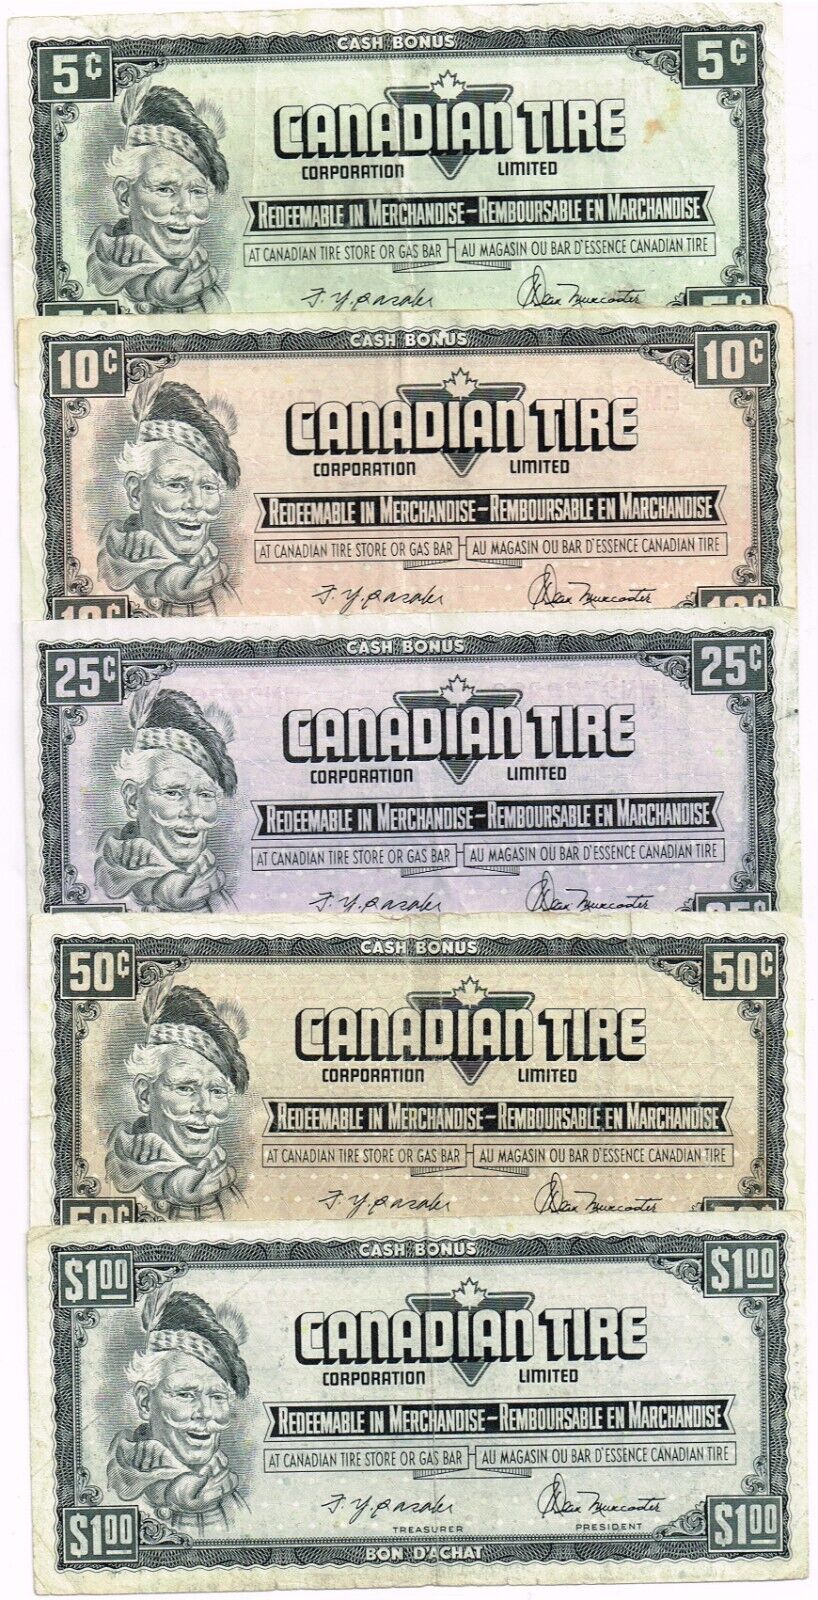 1974 Canadian Tire Banknote Set 5 Cents To 1 Dollar - Vf